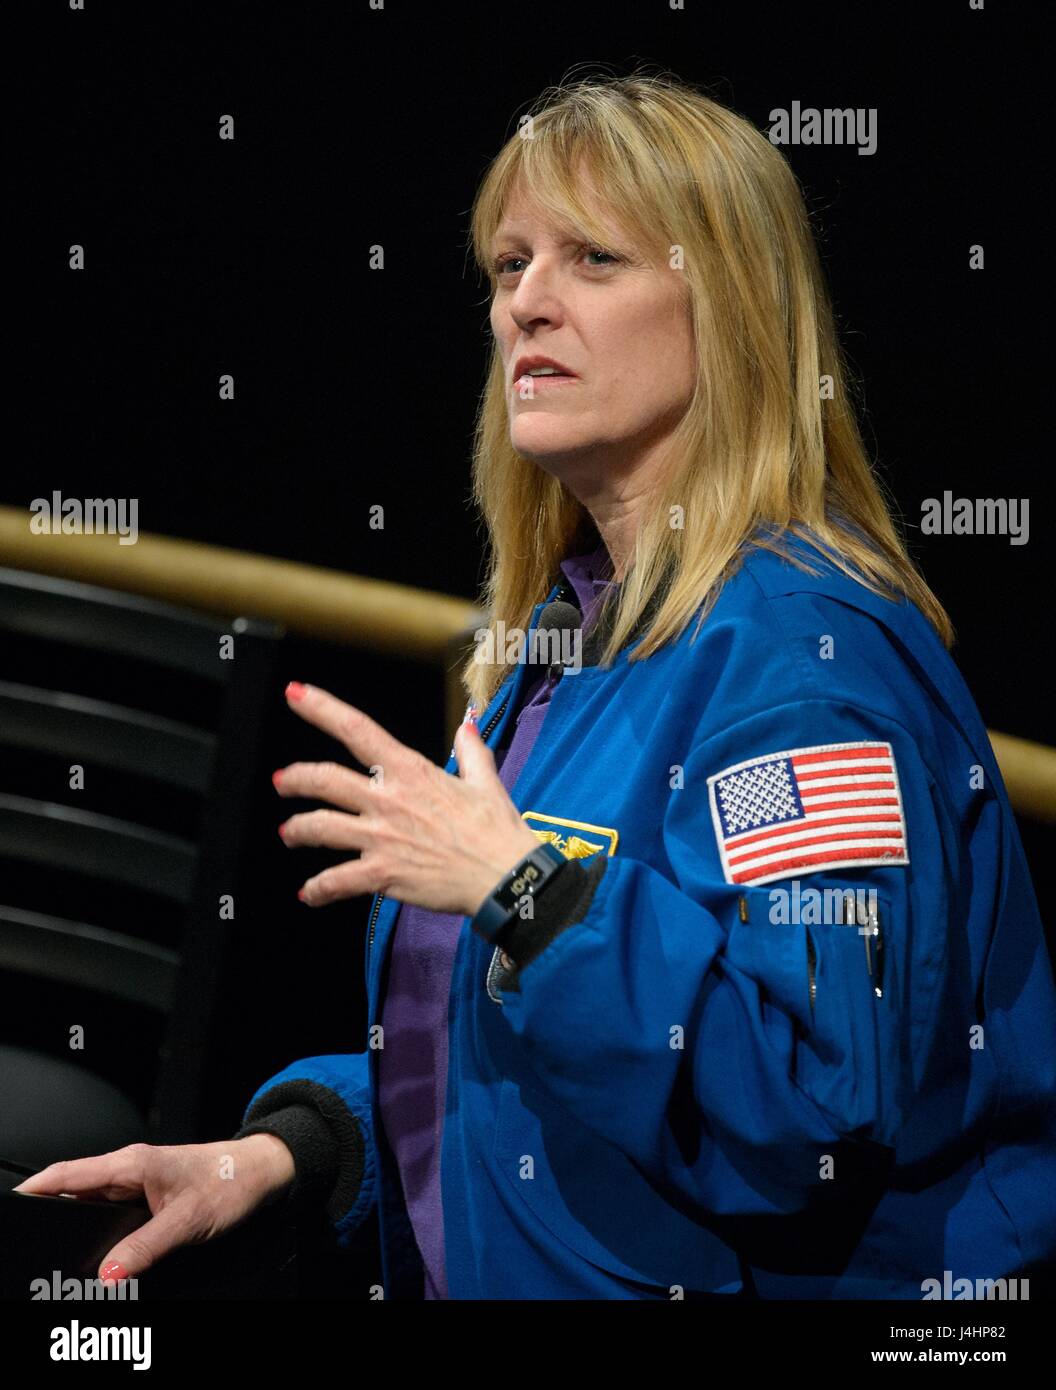 NASA astronaut Kay Hire speaks during the Celebrating Womens History Month - Getting Excited About STEM event at the Smithsonian National Air and Space Museum March 28, 2017 in Washington, DC.     (photo by Joel Kowsky/NASA via Planetpix) Stock Photo